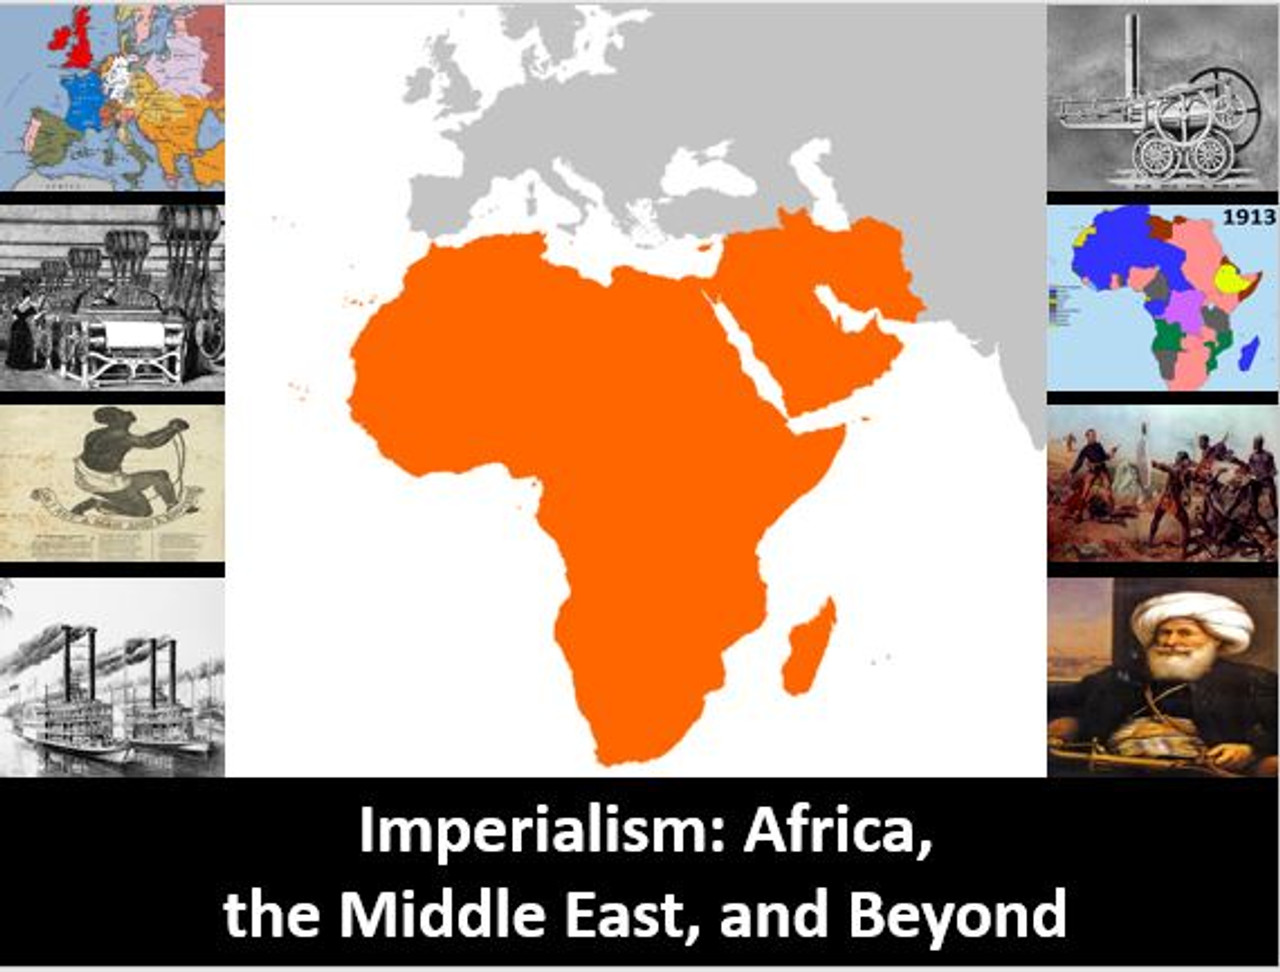 Imperialism: Africa and the Middle East